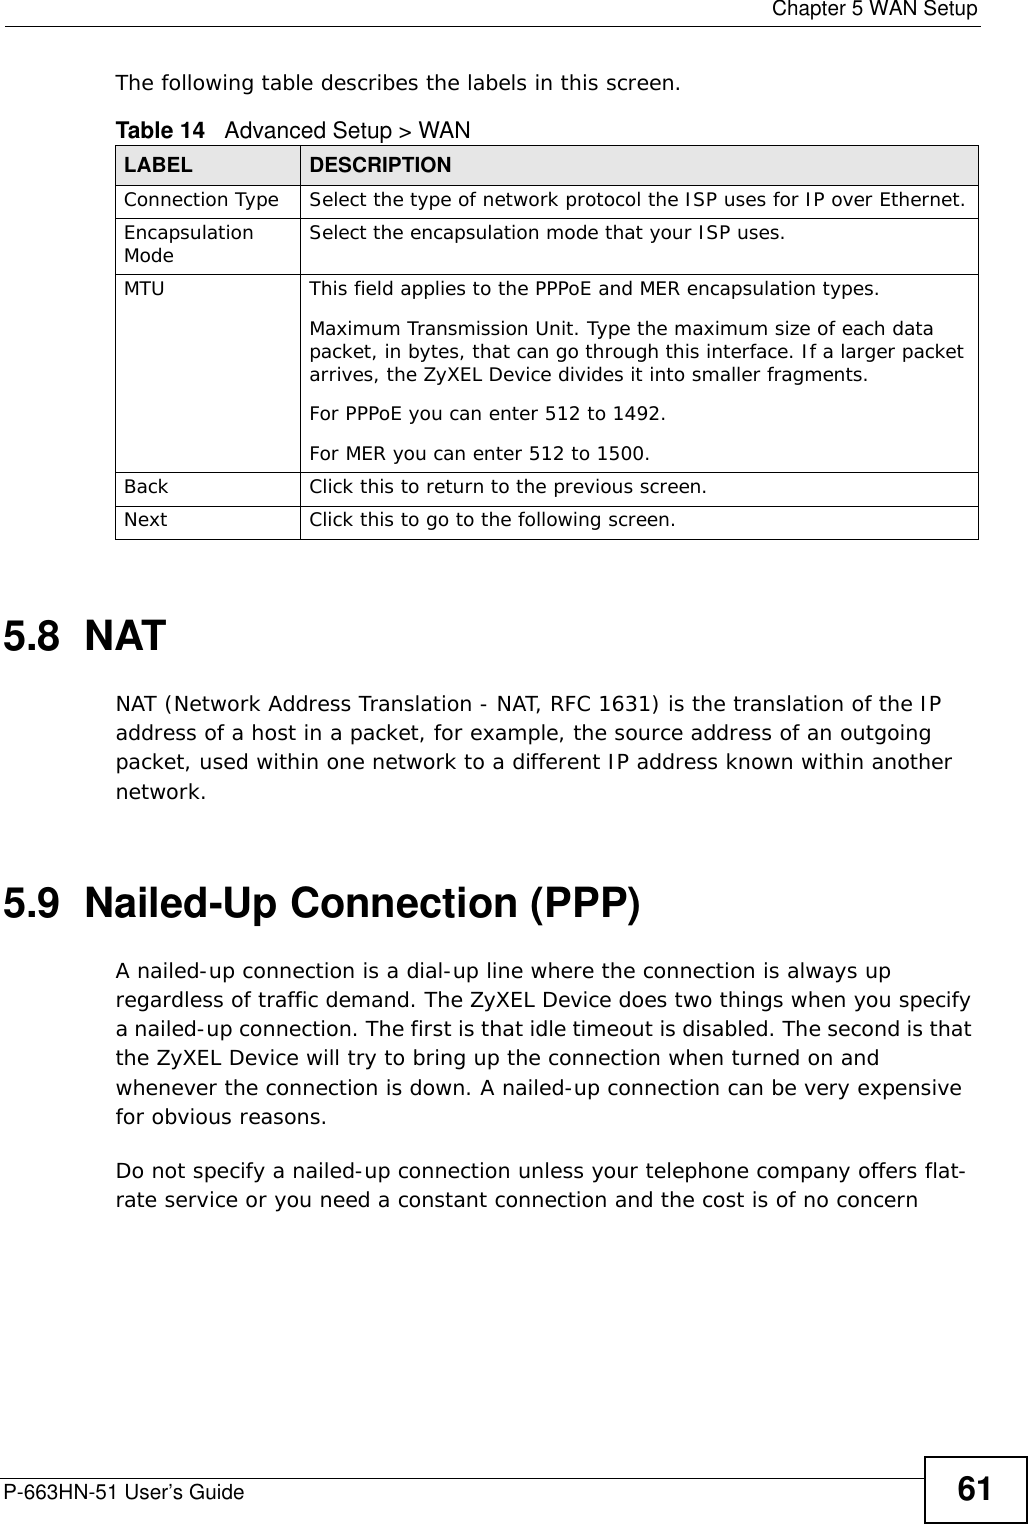  Chapter 5 WAN SetupP-663HN-51 User’s Guide 61The following table describes the labels in this screen.  5.8  NATNAT (Network Address Translation - NAT, RFC 1631) is the translation of the IP address of a host in a packet, for example, the source address of an outgoing packet, used within one network to a different IP address known within another network.5.9  Nailed-Up Connection (PPP)A nailed-up connection is a dial-up line where the connection is always up regardless of traffic demand. The ZyXEL Device does two things when you specify a nailed-up connection. The first is that idle timeout is disabled. The second is that the ZyXEL Device will try to bring up the connection when turned on and whenever the connection is down. A nailed-up connection can be very expensive for obvious reasons. Do not specify a nailed-up connection unless your telephone company offers flat-rate service or you need a constant connection and the cost is of no concernTable 14   Advanced Setup &gt; WANLABEL DESCRIPTIONConnection Type Select the type of network protocol the ISP uses for IP over Ethernet.Encapsulation Mode Select the encapsulation mode that your ISP uses.MTU This field applies to the PPPoE and MER encapsulation types.Maximum Transmission Unit. Type the maximum size of each data packet, in bytes, that can go through this interface. If a larger packet arrives, the ZyXEL Device divides it into smaller fragments. For PPPoE you can enter 512 to 1492.For MER you can enter 512 to 1500.Back Click this to return to the previous screen.Next Click this to go to the following screen.